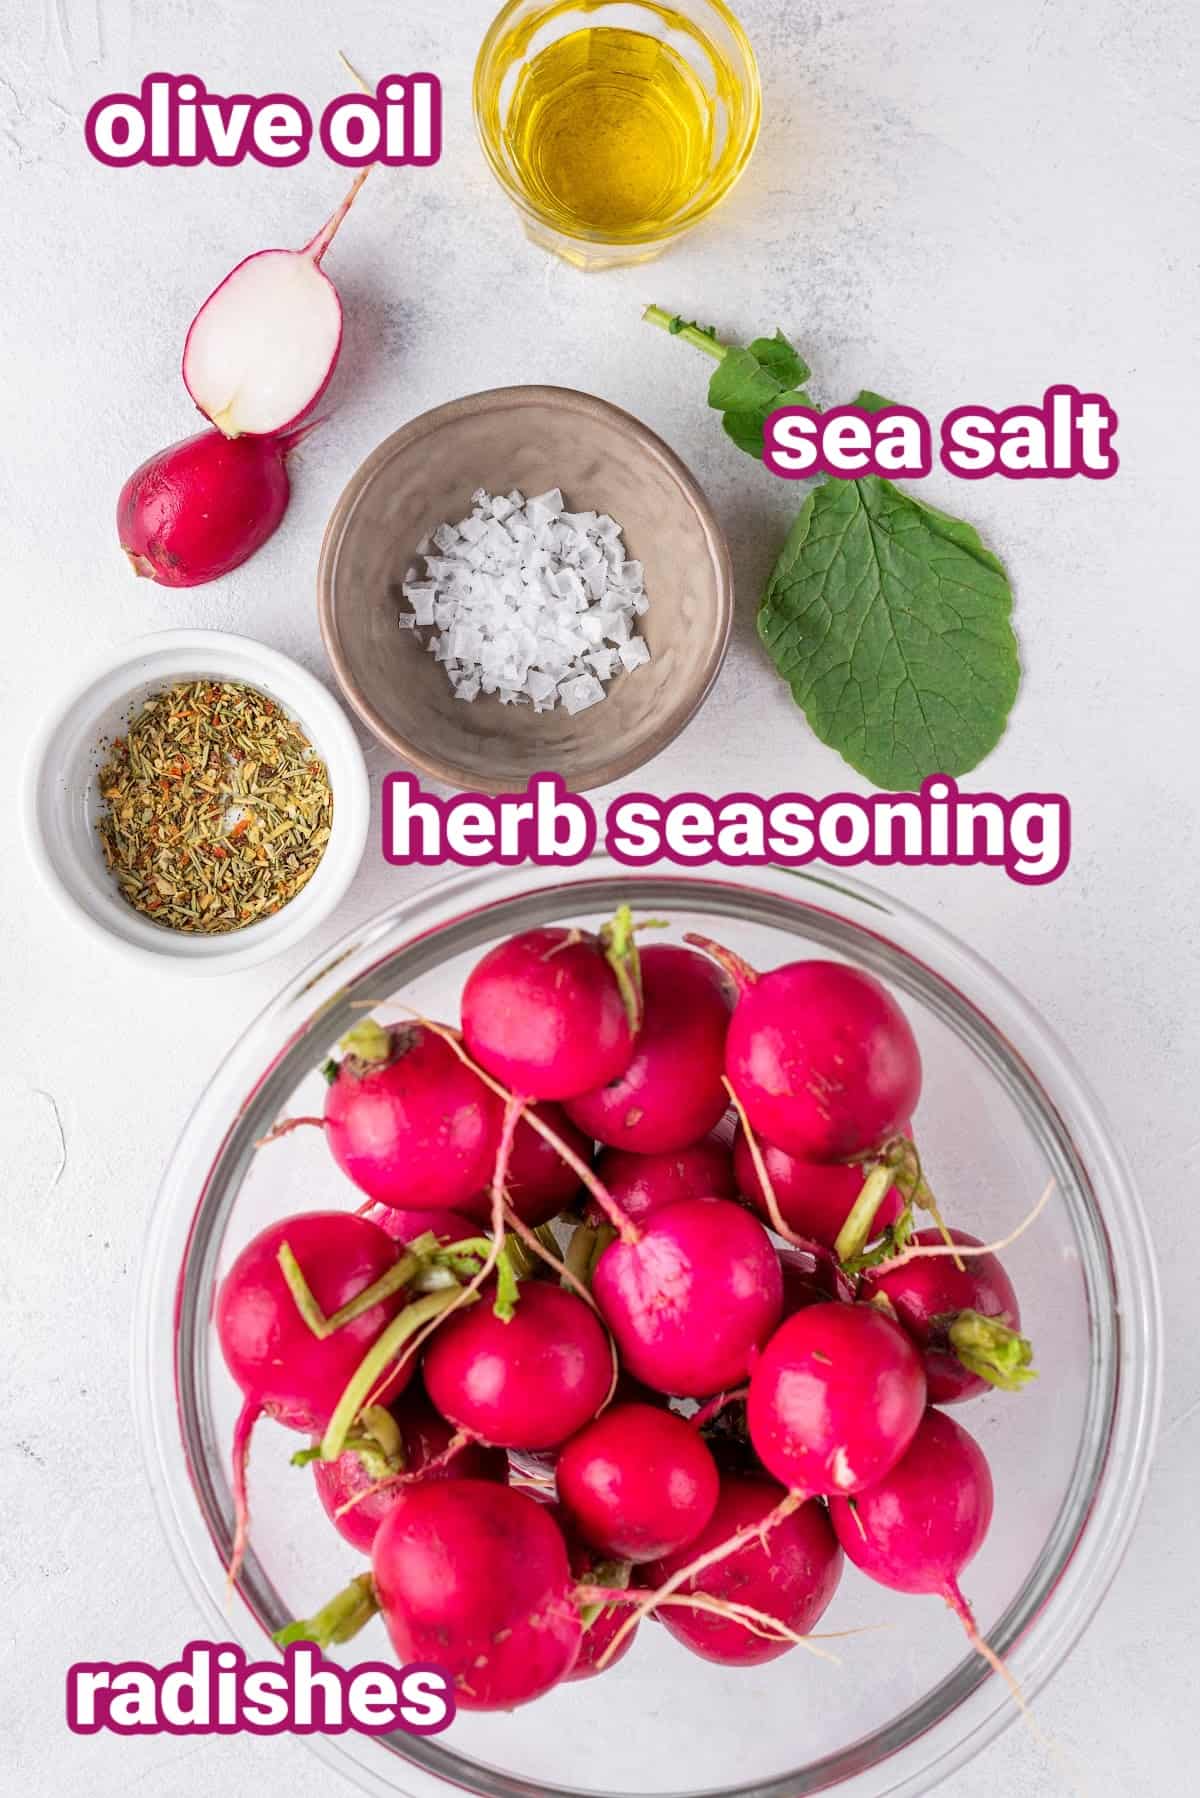 ingredients to make simple roasted air fryer radishes like olive oil, sea salt, raw radishes, and mixed herb seasoning